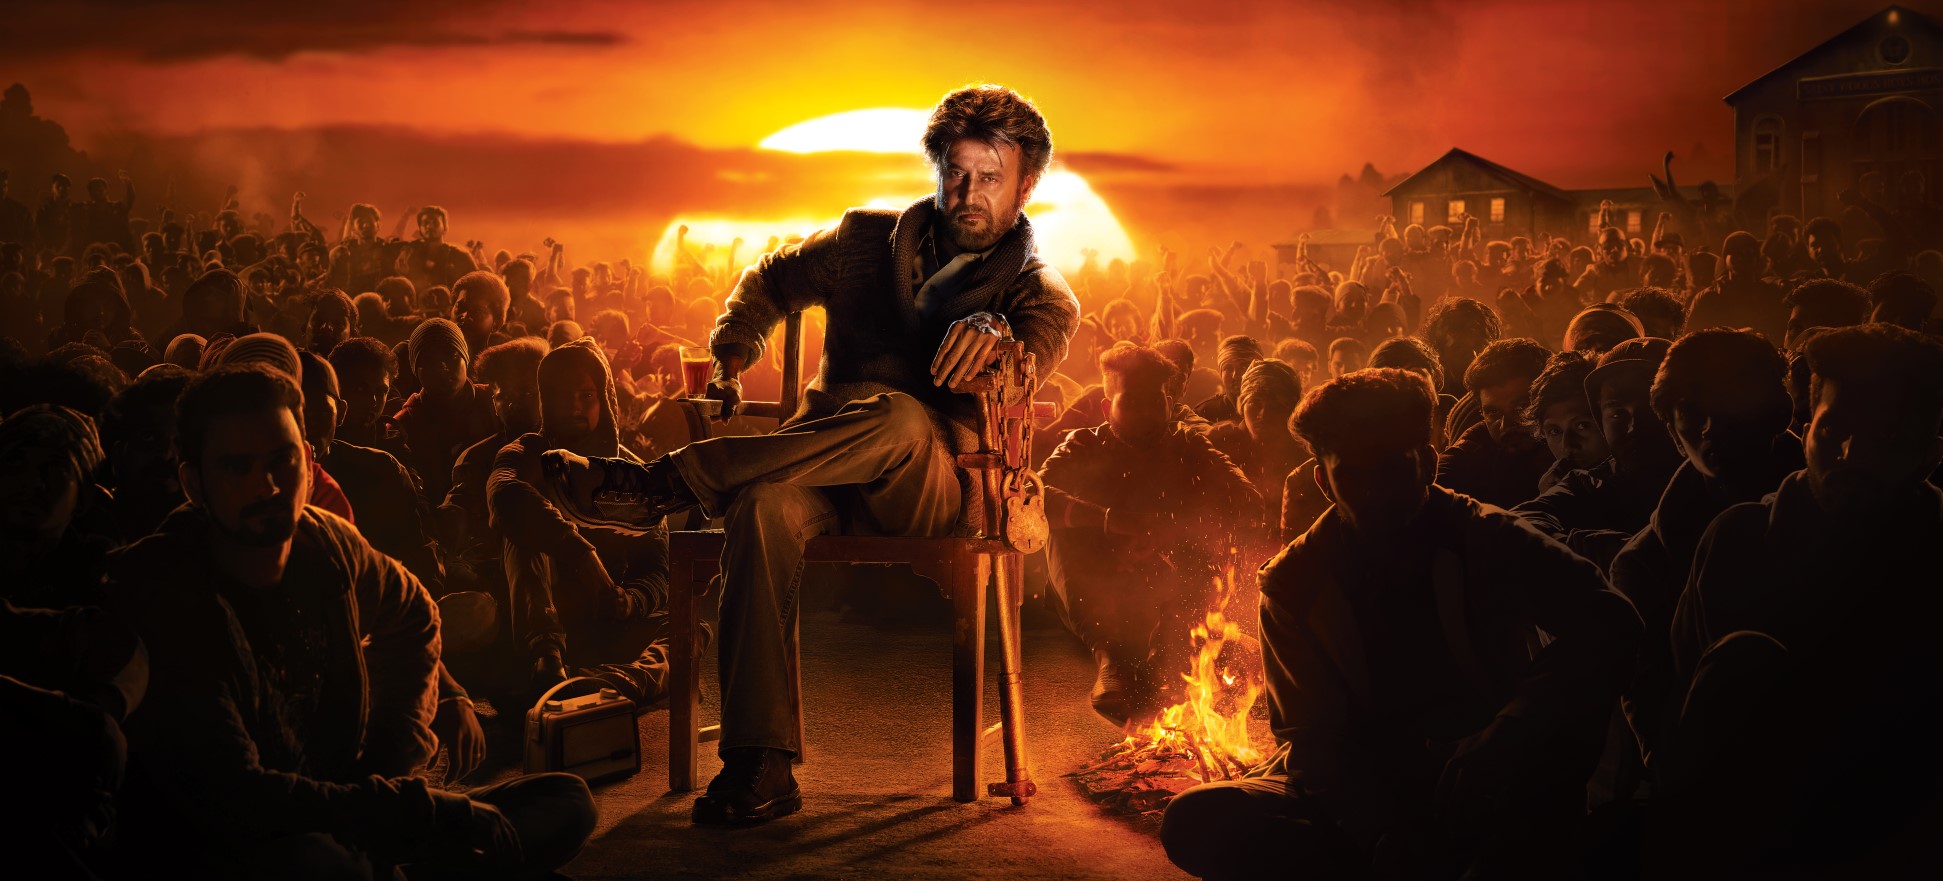 Rajini recently secured his superstar status with Petta, which crossed Rs 100 crore worldwide on its first weekend